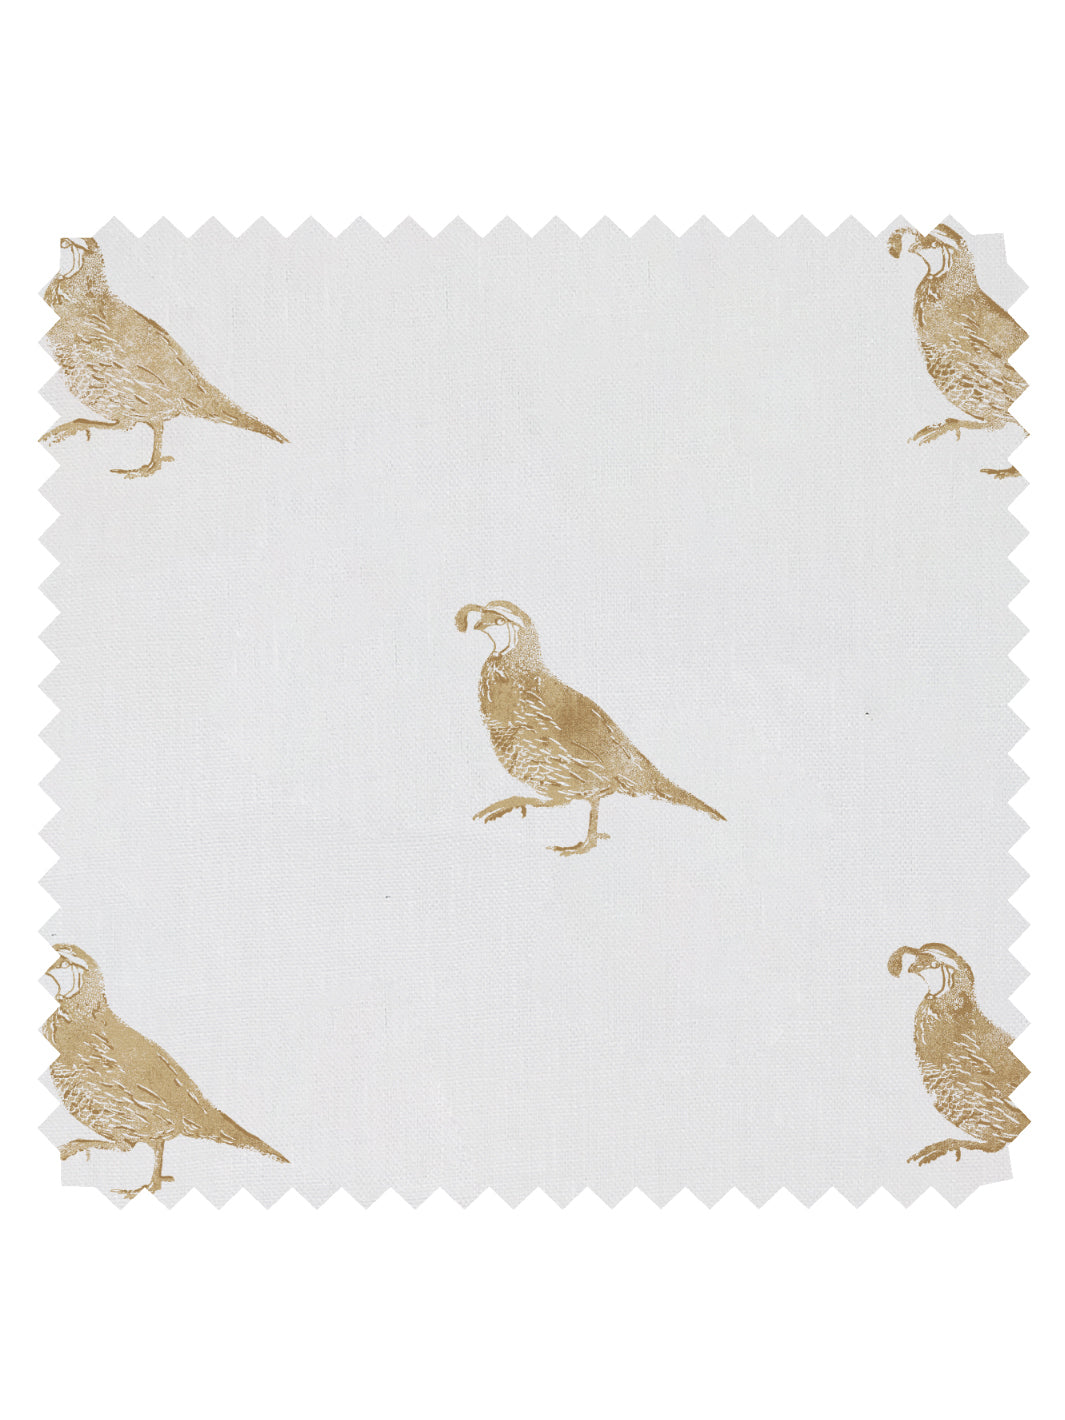 'California Quail' Linen Fabric by Nathan Turner - Gold